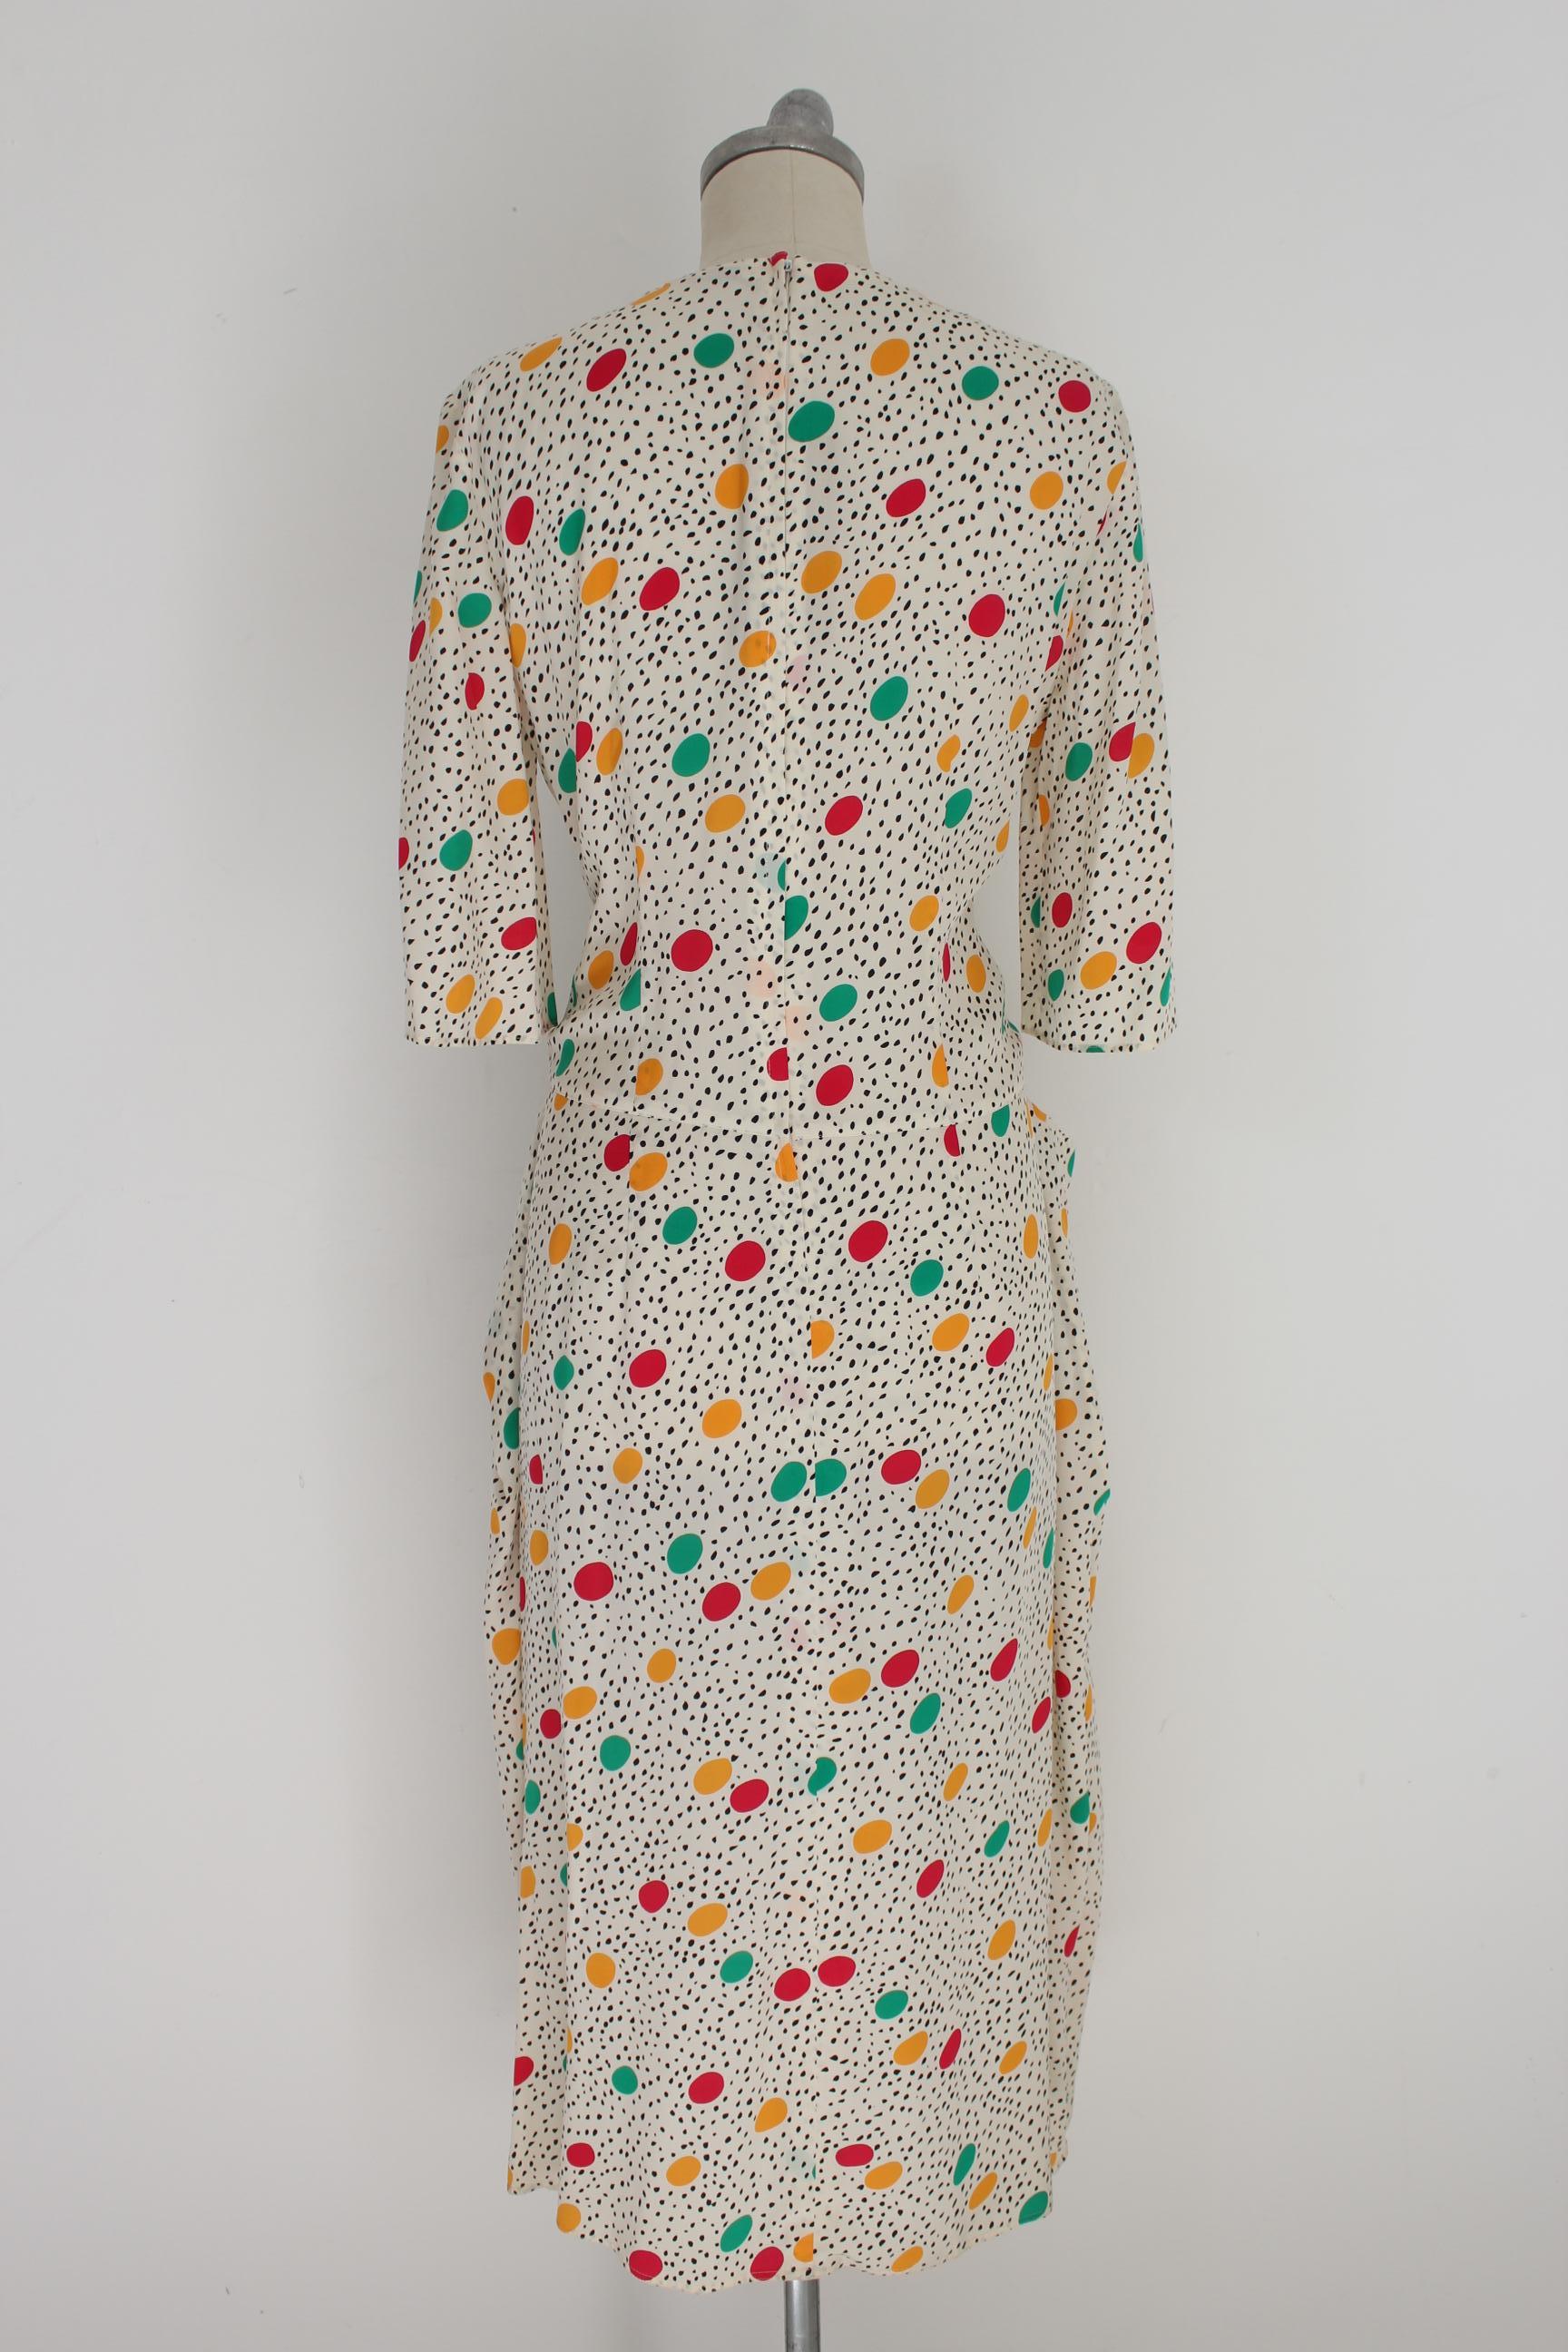 Mariella Burani long vintage dress 90s. In silk, white with red, green and black yellow polka dots. Model 